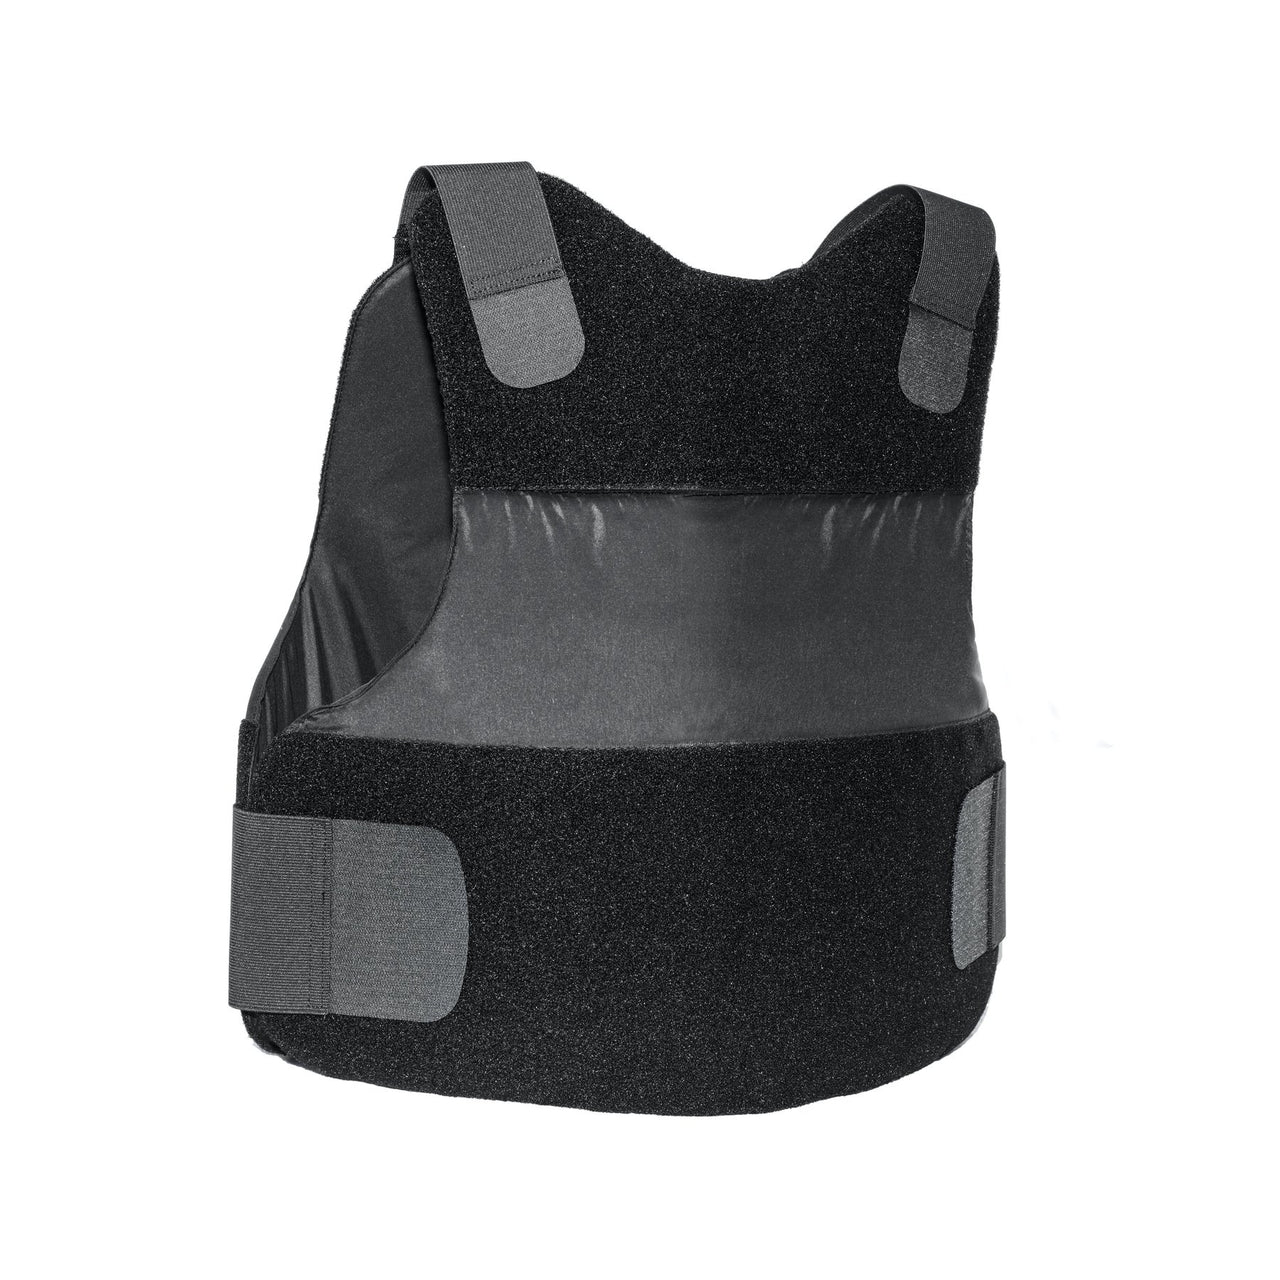 An image of a Body Armor Direct Freedom Concealable Carrier vest on a white background.